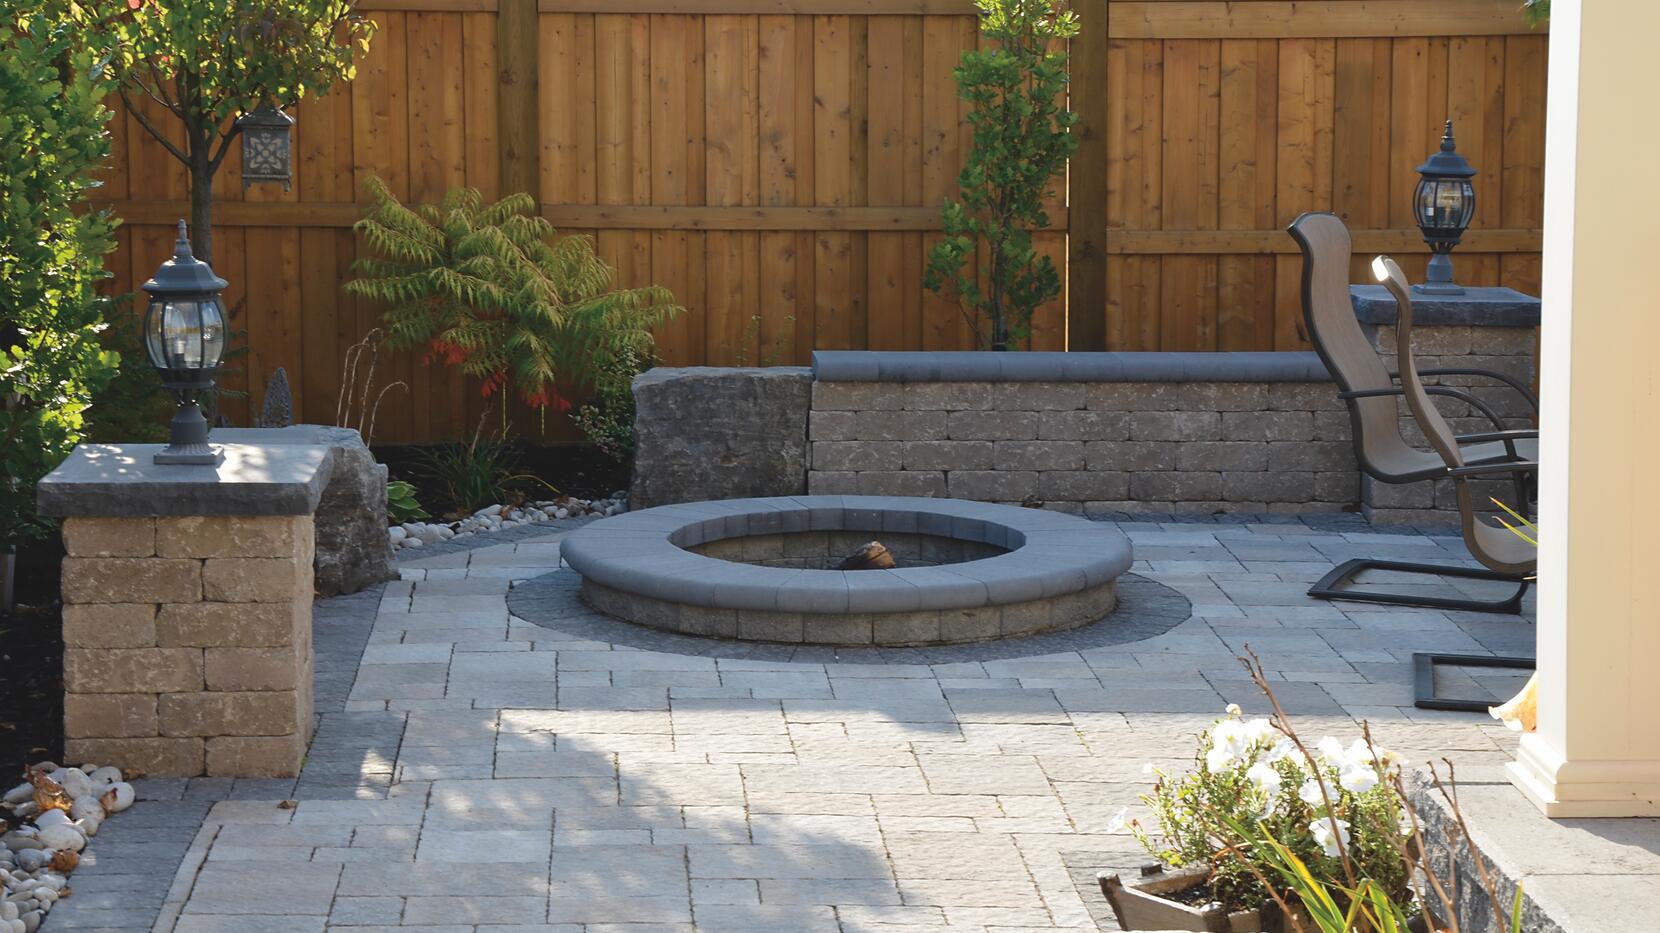 Wall and Pillars: Castlerok 2, Sandstone Firepit: Ortana, Greyfield with Cassina, Onyx